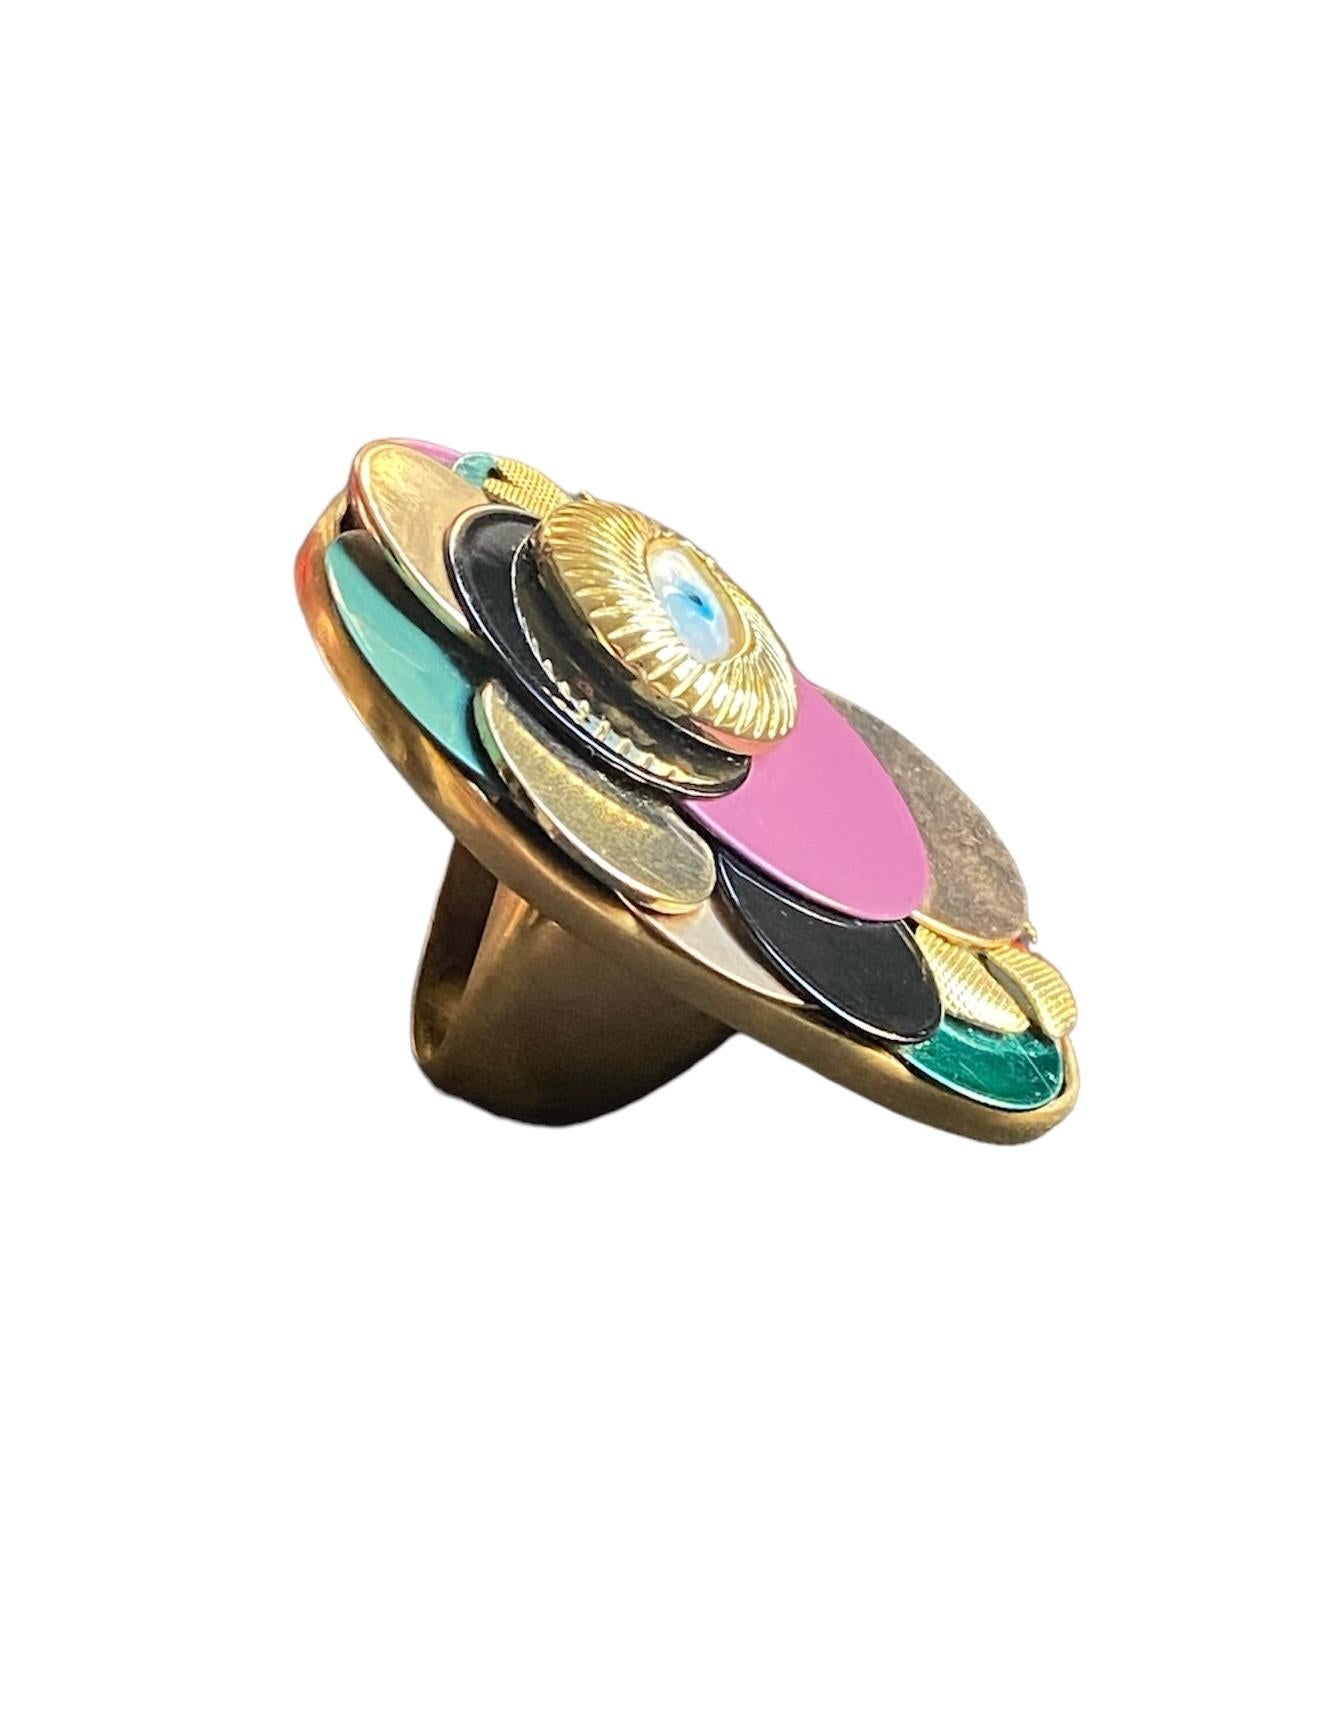 Artisan One Off Ring. High Upcycling. Gold Plated Bronze & Vintage Elements. For Sale